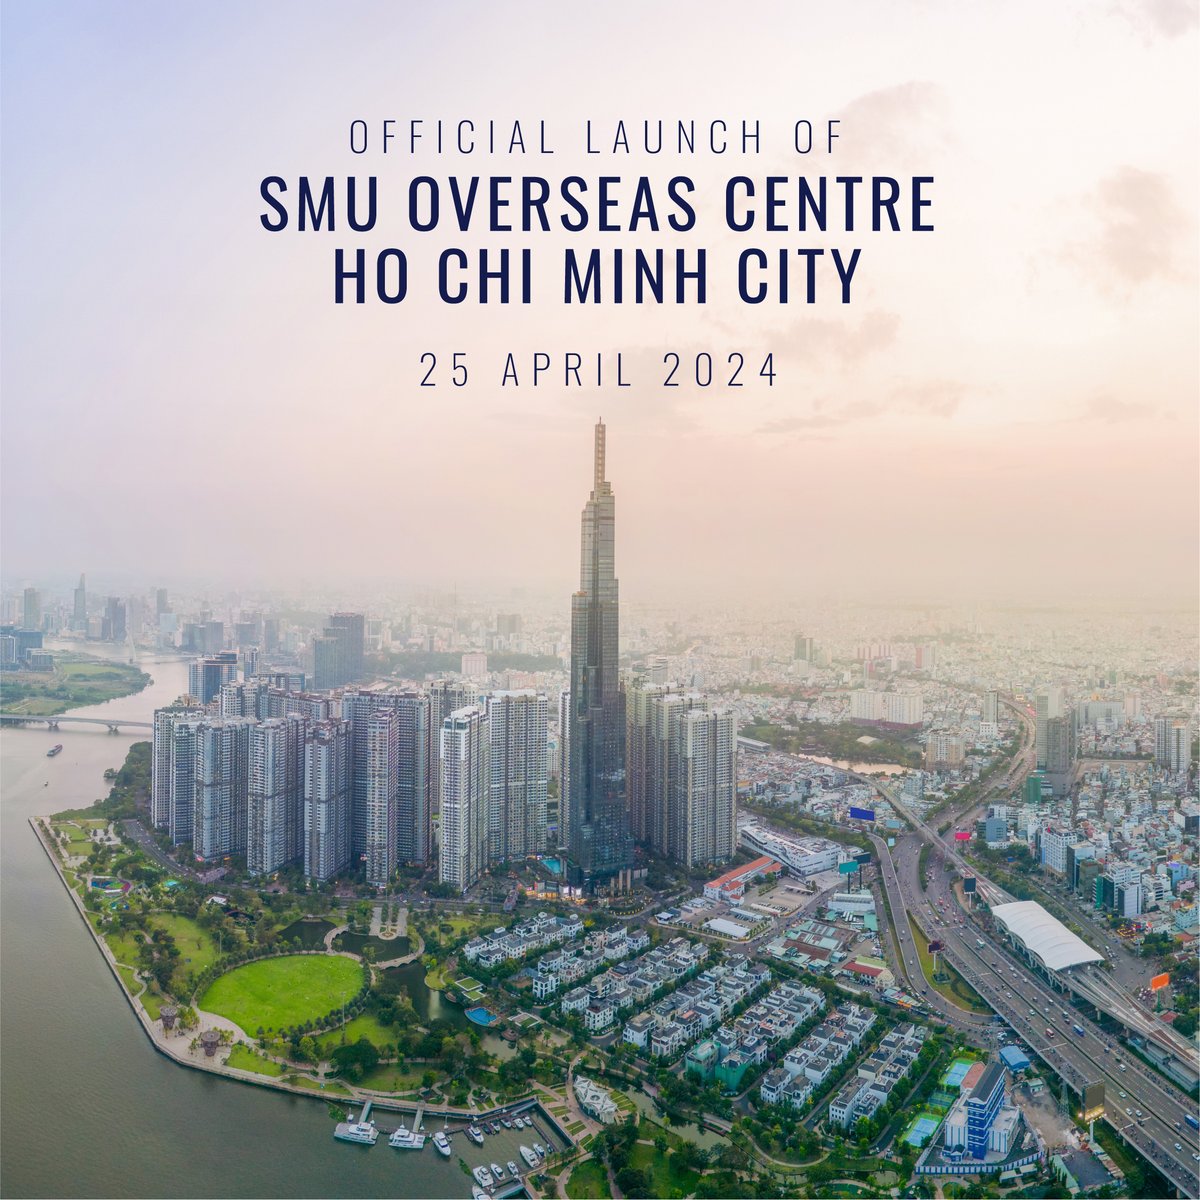 Excited to announce the opening of our SMU Overseas Centre in Ho Chi Minh City (OC HCMC) on 25 April 2024! This marks a significant step in our commitment to international collaboration and #GrowthInAsia. Stay tuned for updates! #SGSMUOCHCMC #SGSMU